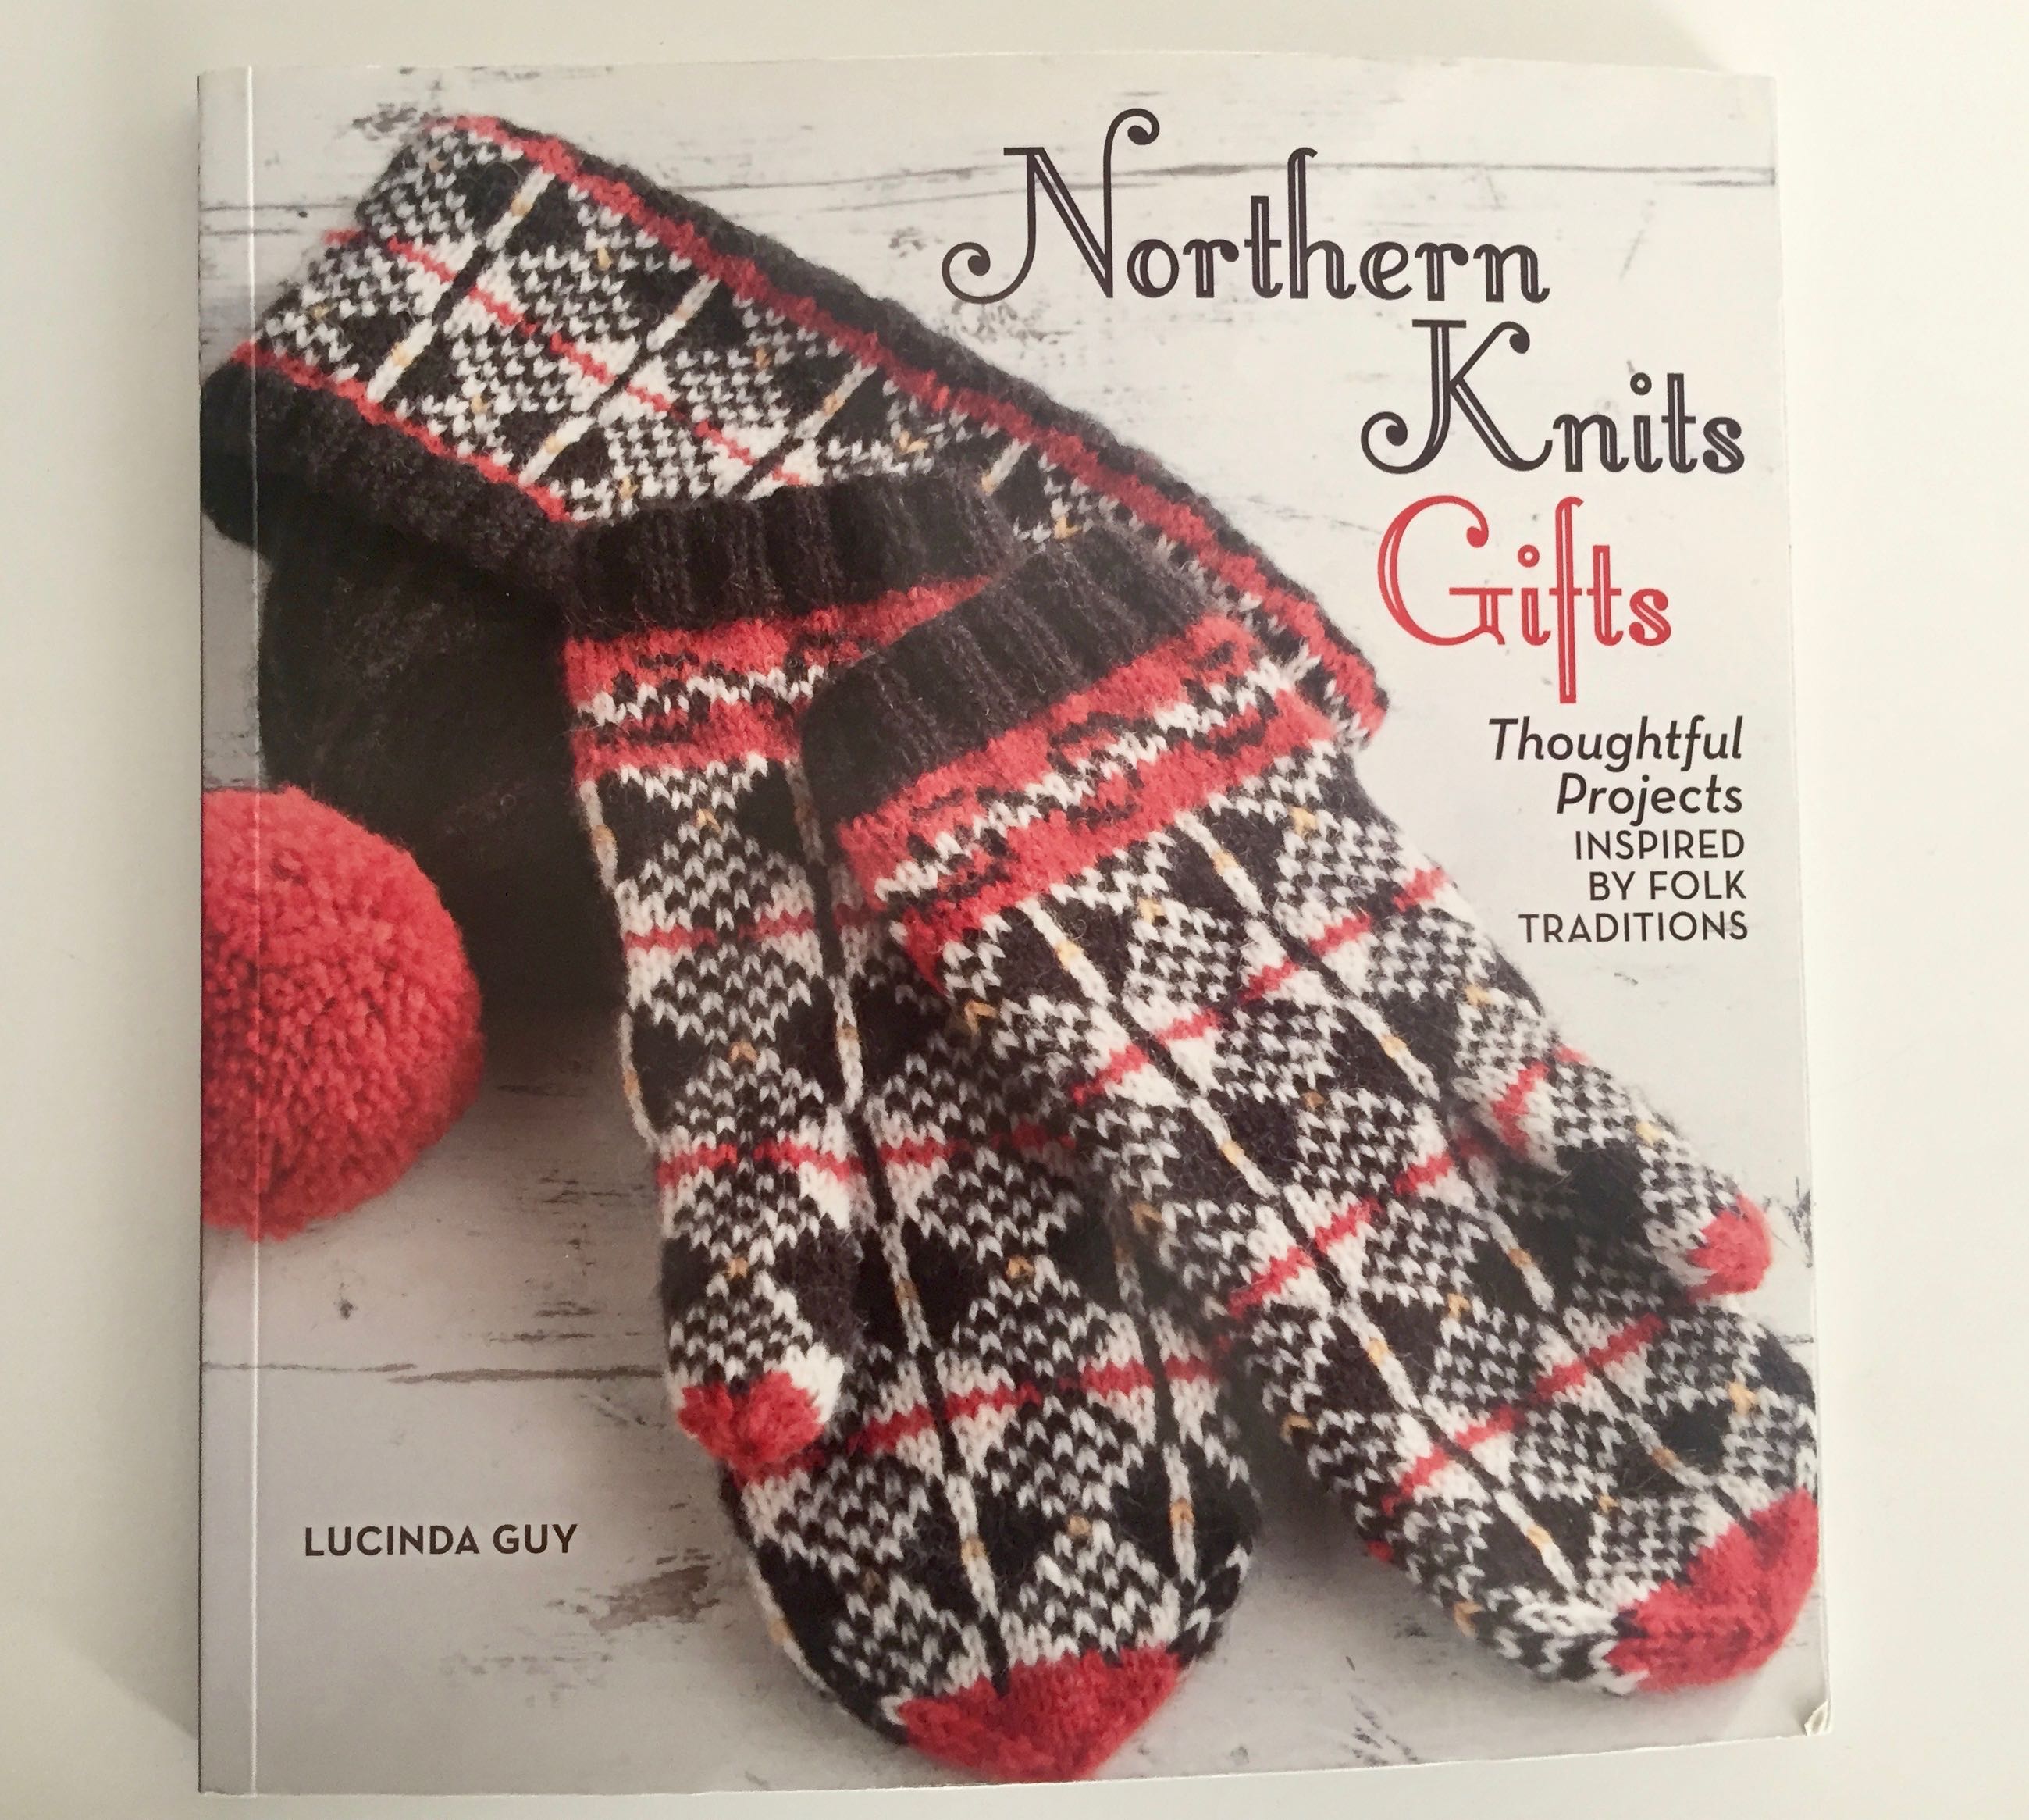 Lucinda Guy: Northern Knits Gifts